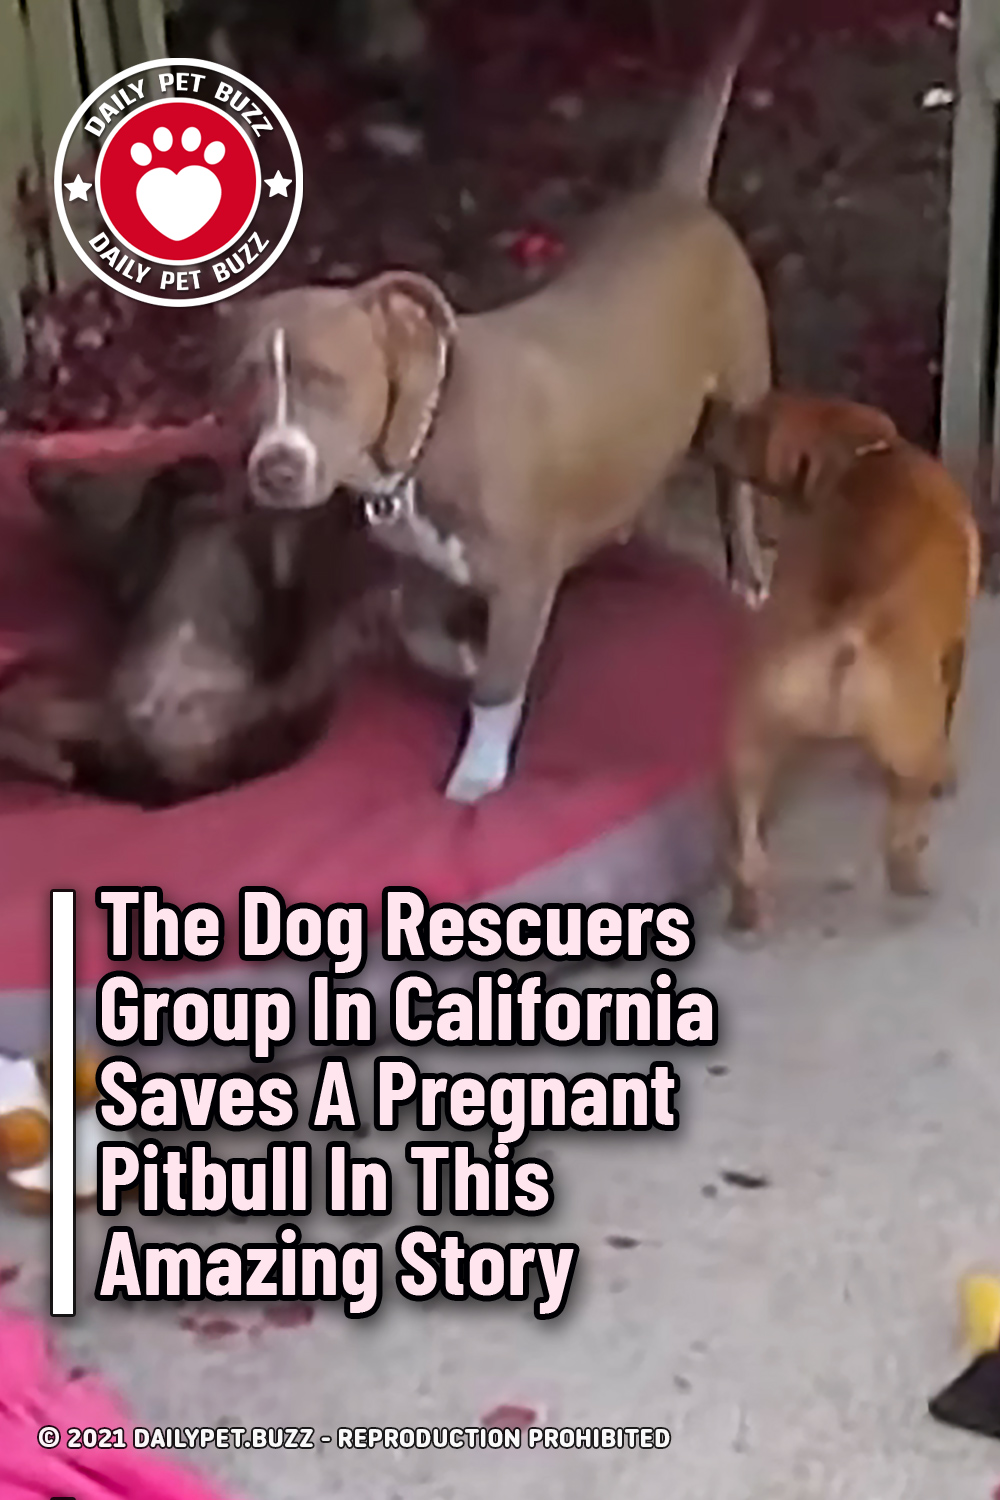 The Dog Rescuers Group In California Saves A Pregnant Pitbull In This Amazing Story